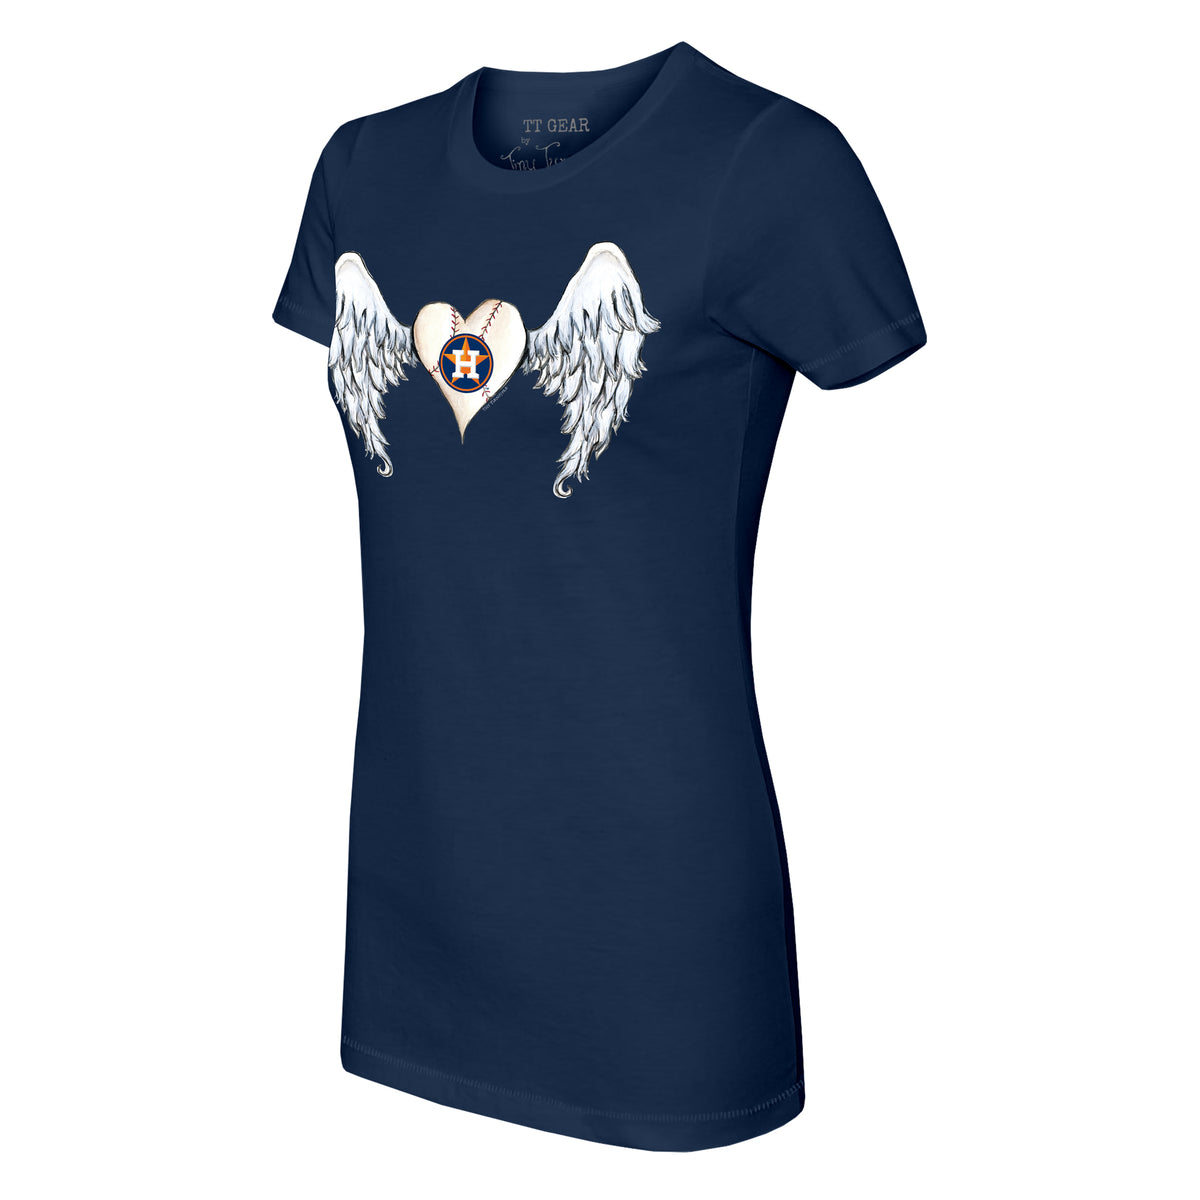 Angelic Astros Astros Baseball Limited edition T-shirt